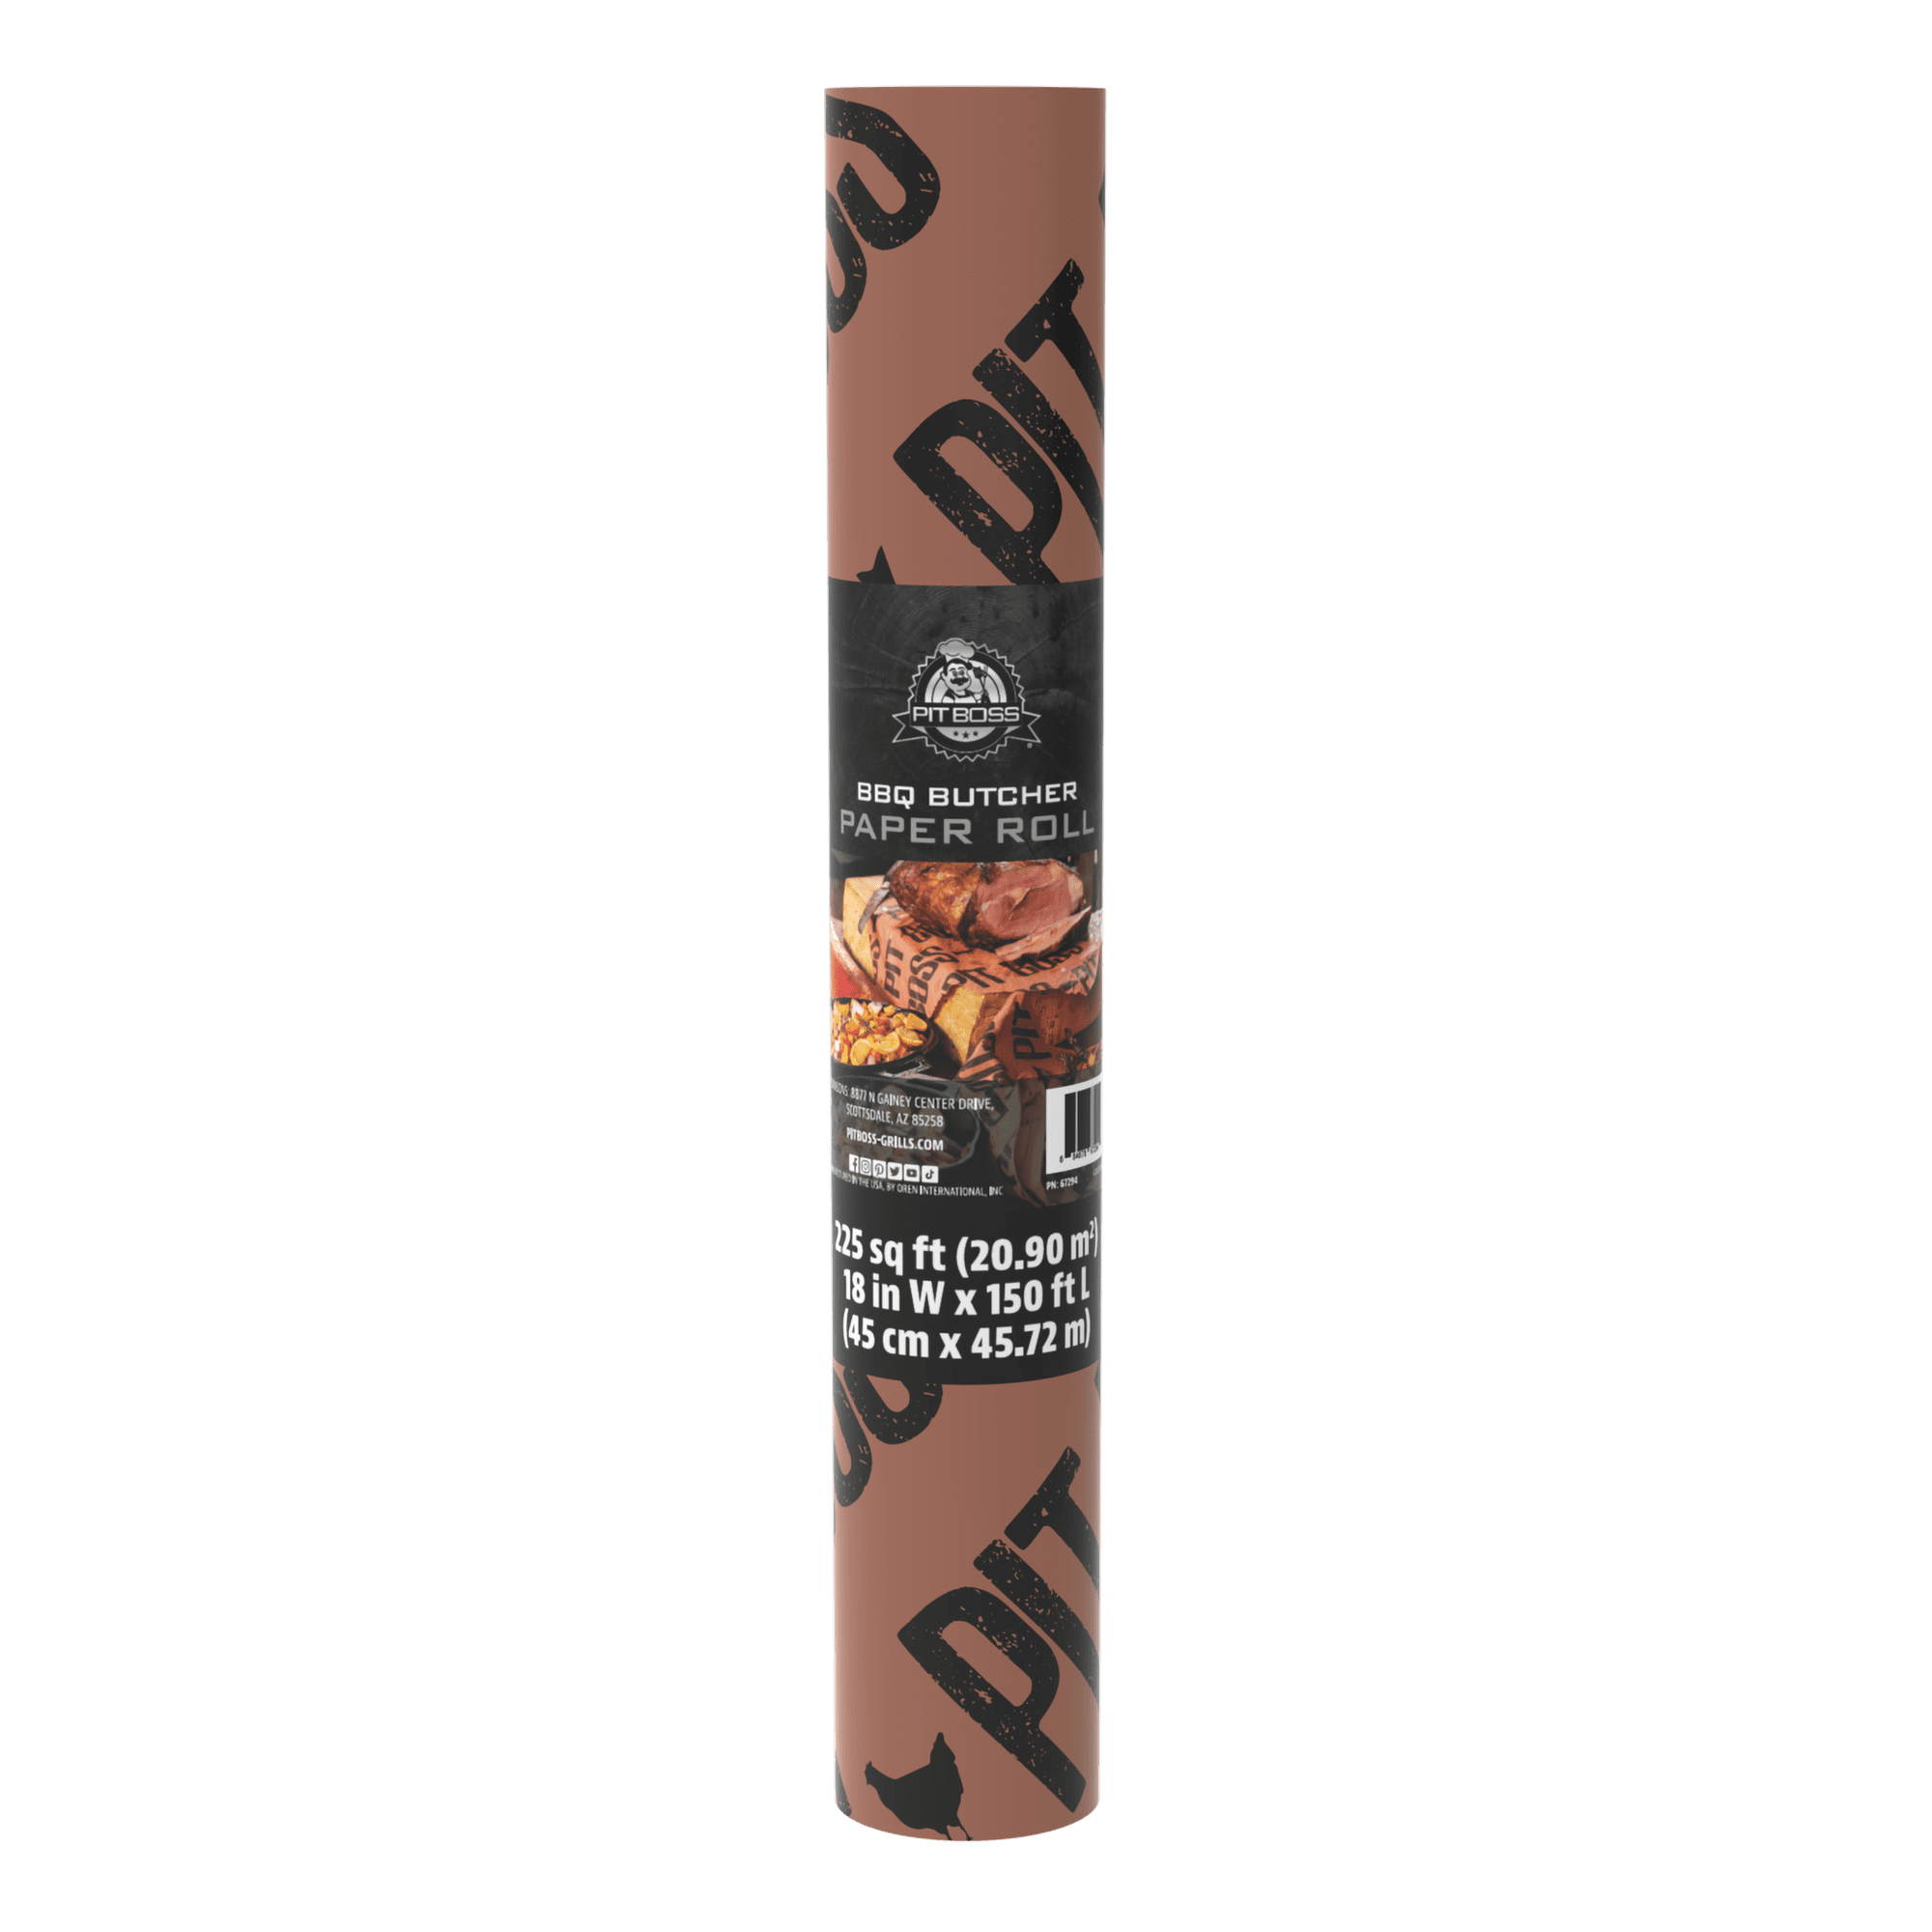 Brown Butcher Paper - 18 x 150' - Butcher Paper Roll for Wrapping &  Smoking Meat - Unwaxed, Unbleached, Durable Food Grade Brown Paper Roll -  Brown Kraft Paper Roll for BBQ